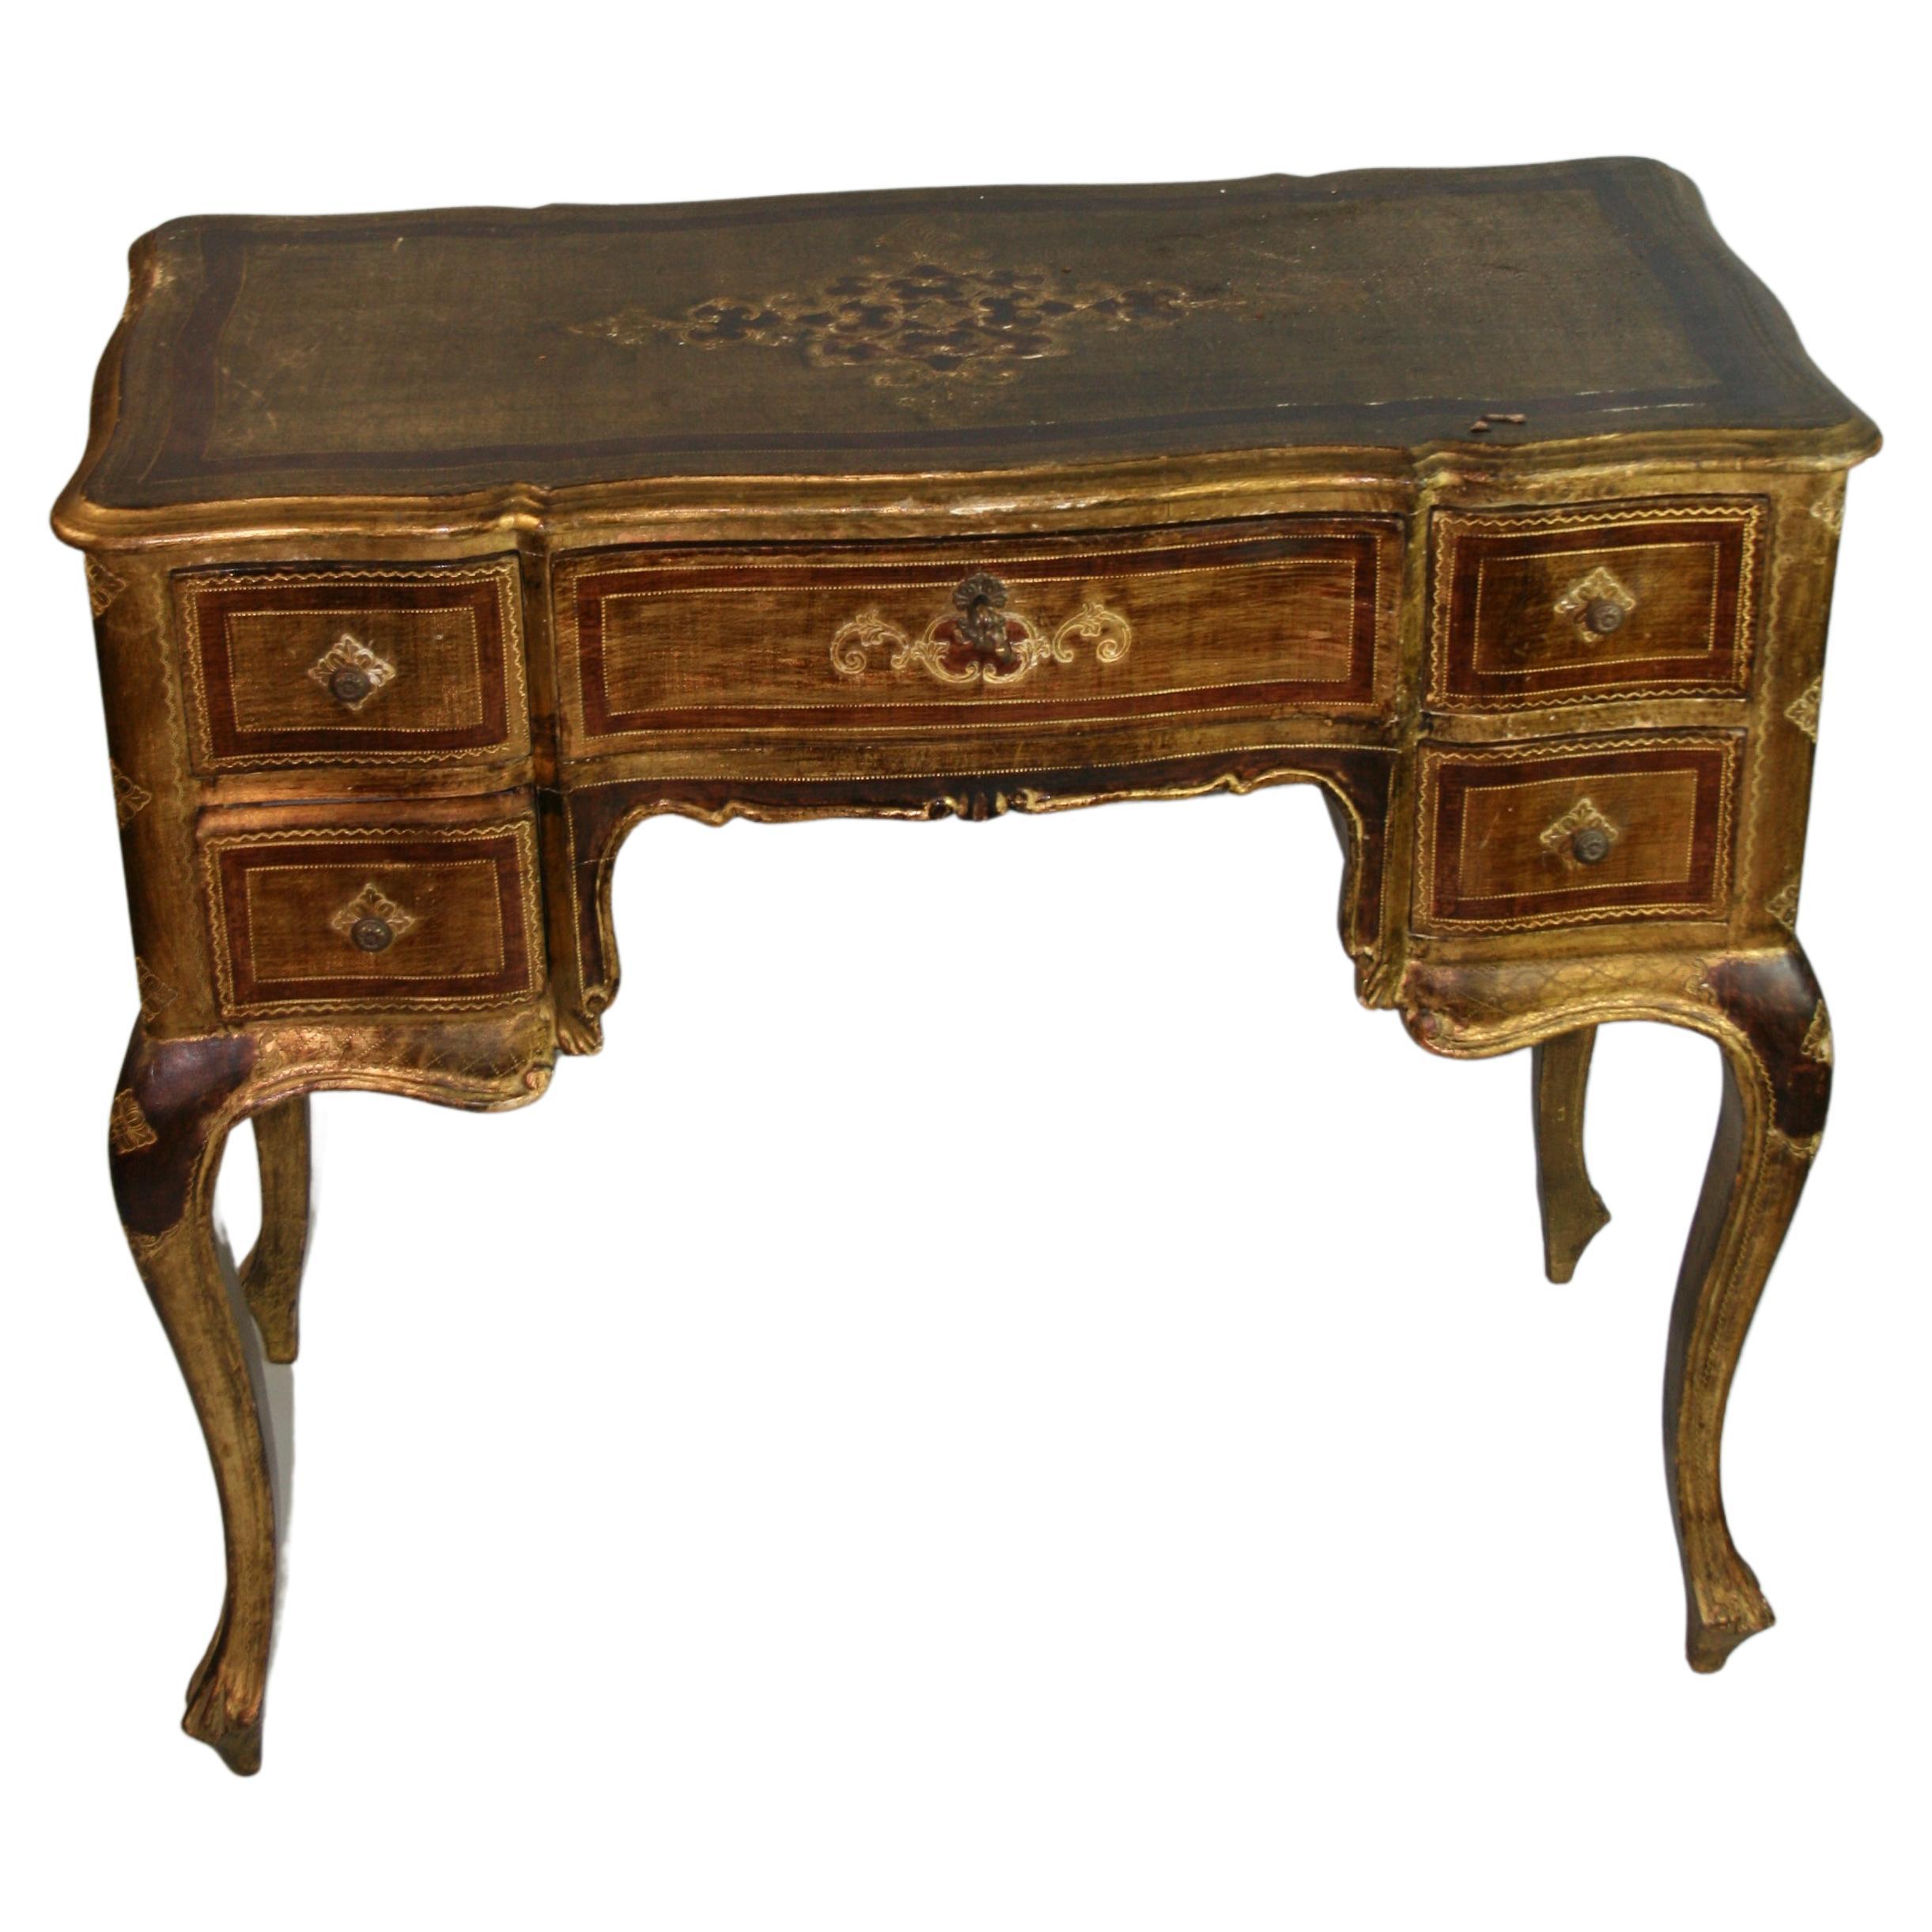 1290 Hand painted Venetian style desk with gilt finish.